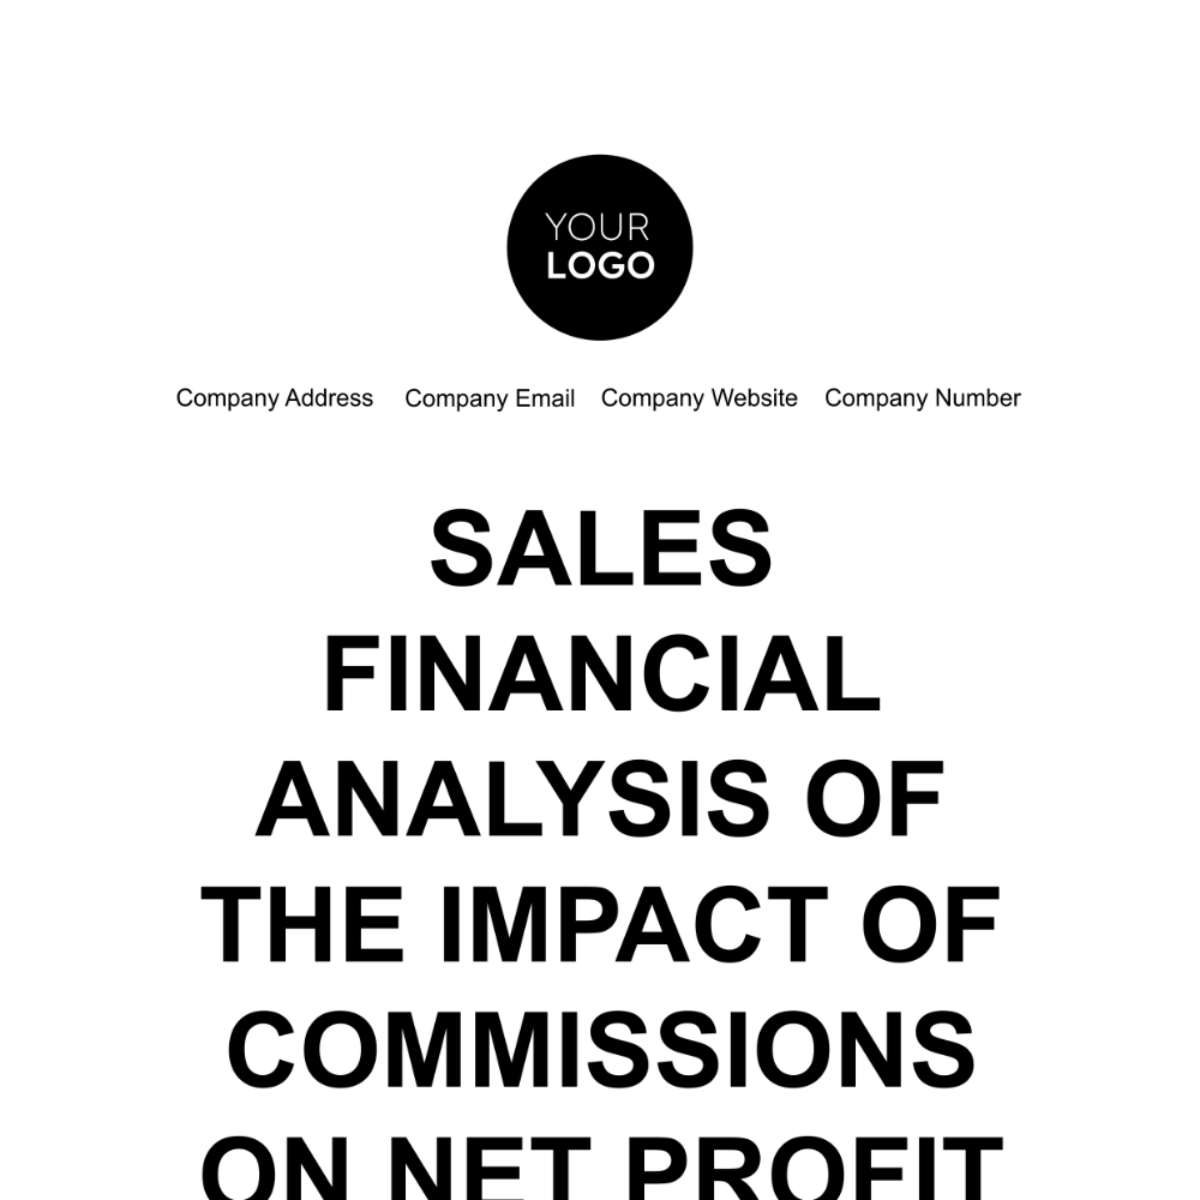 Sales Financial Analysis of the Impact of Commissions on Net Profit Template